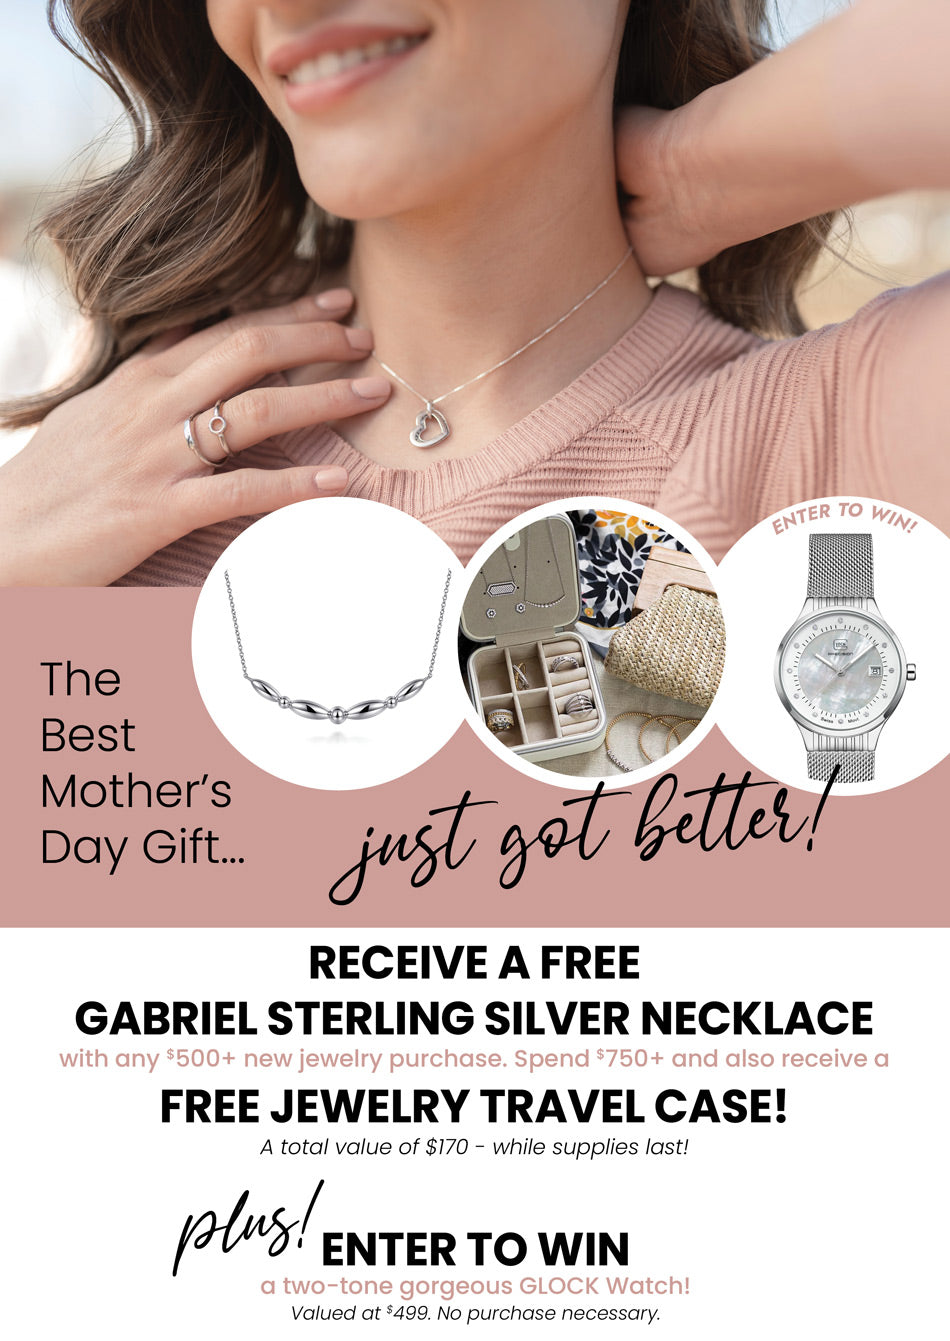 The best mother's day gift just got better! Free gifts with minimum purchase.